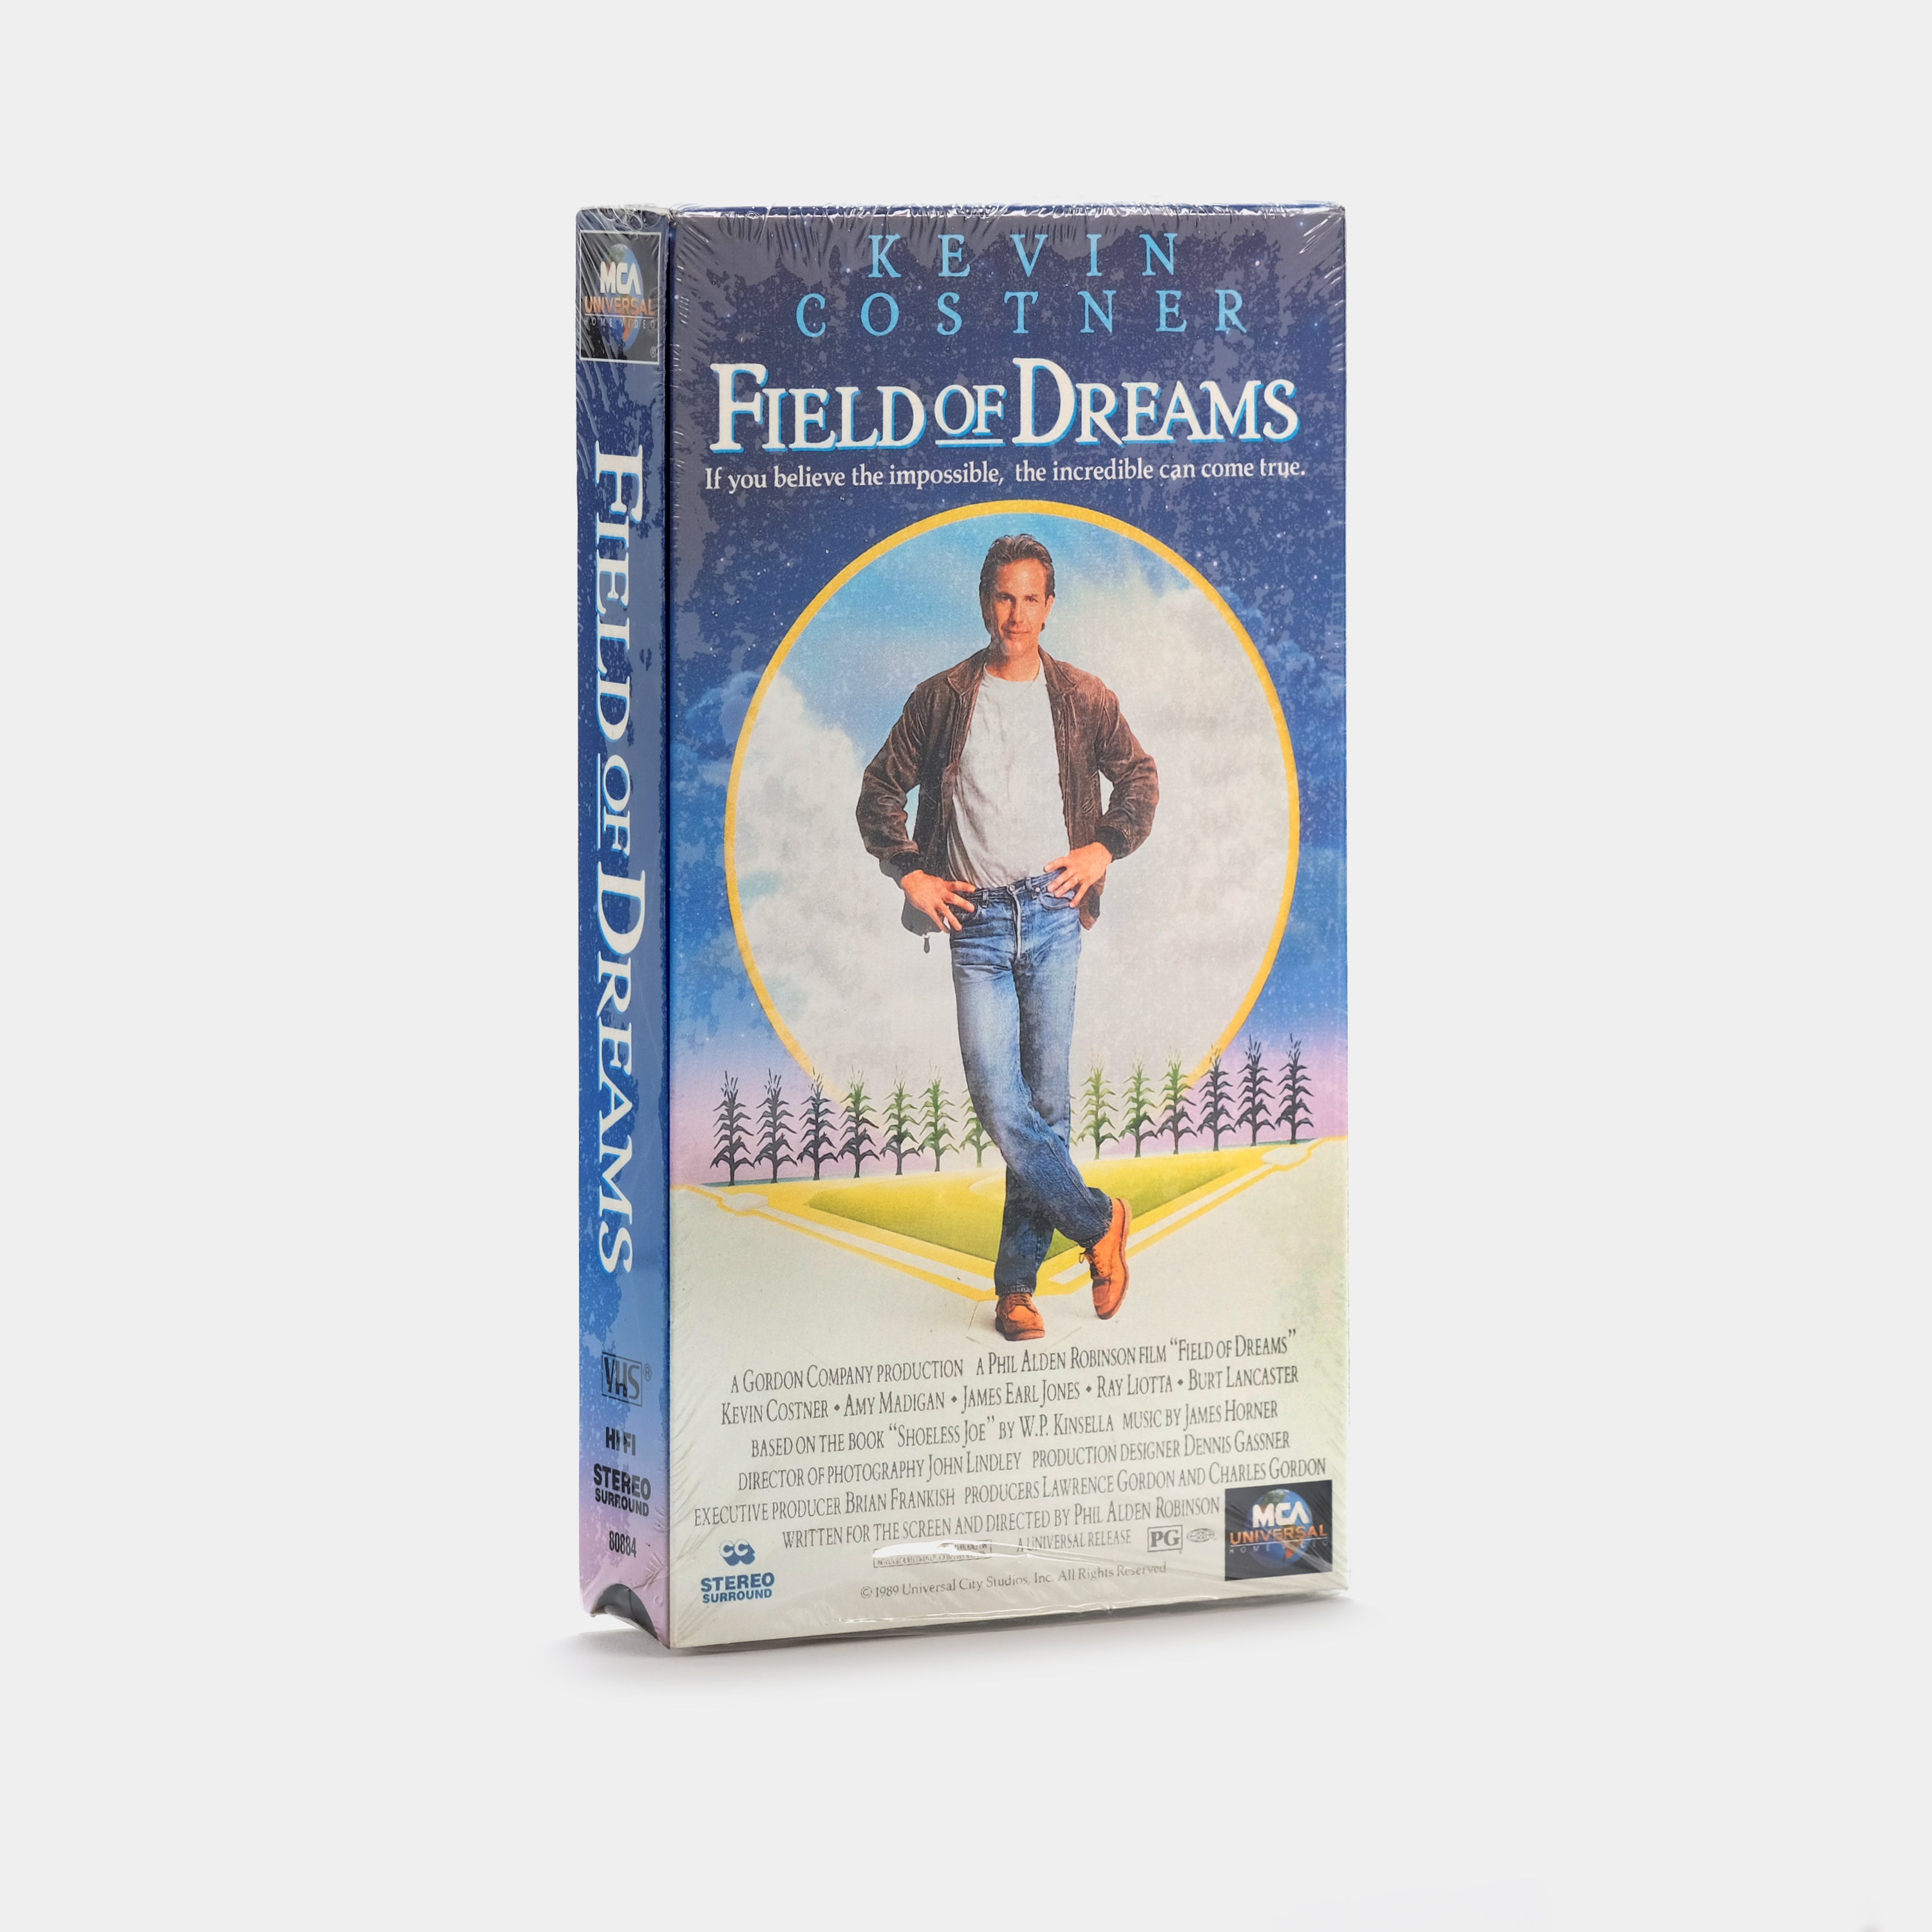 Field of Dreams (Sealed) VHS Tape